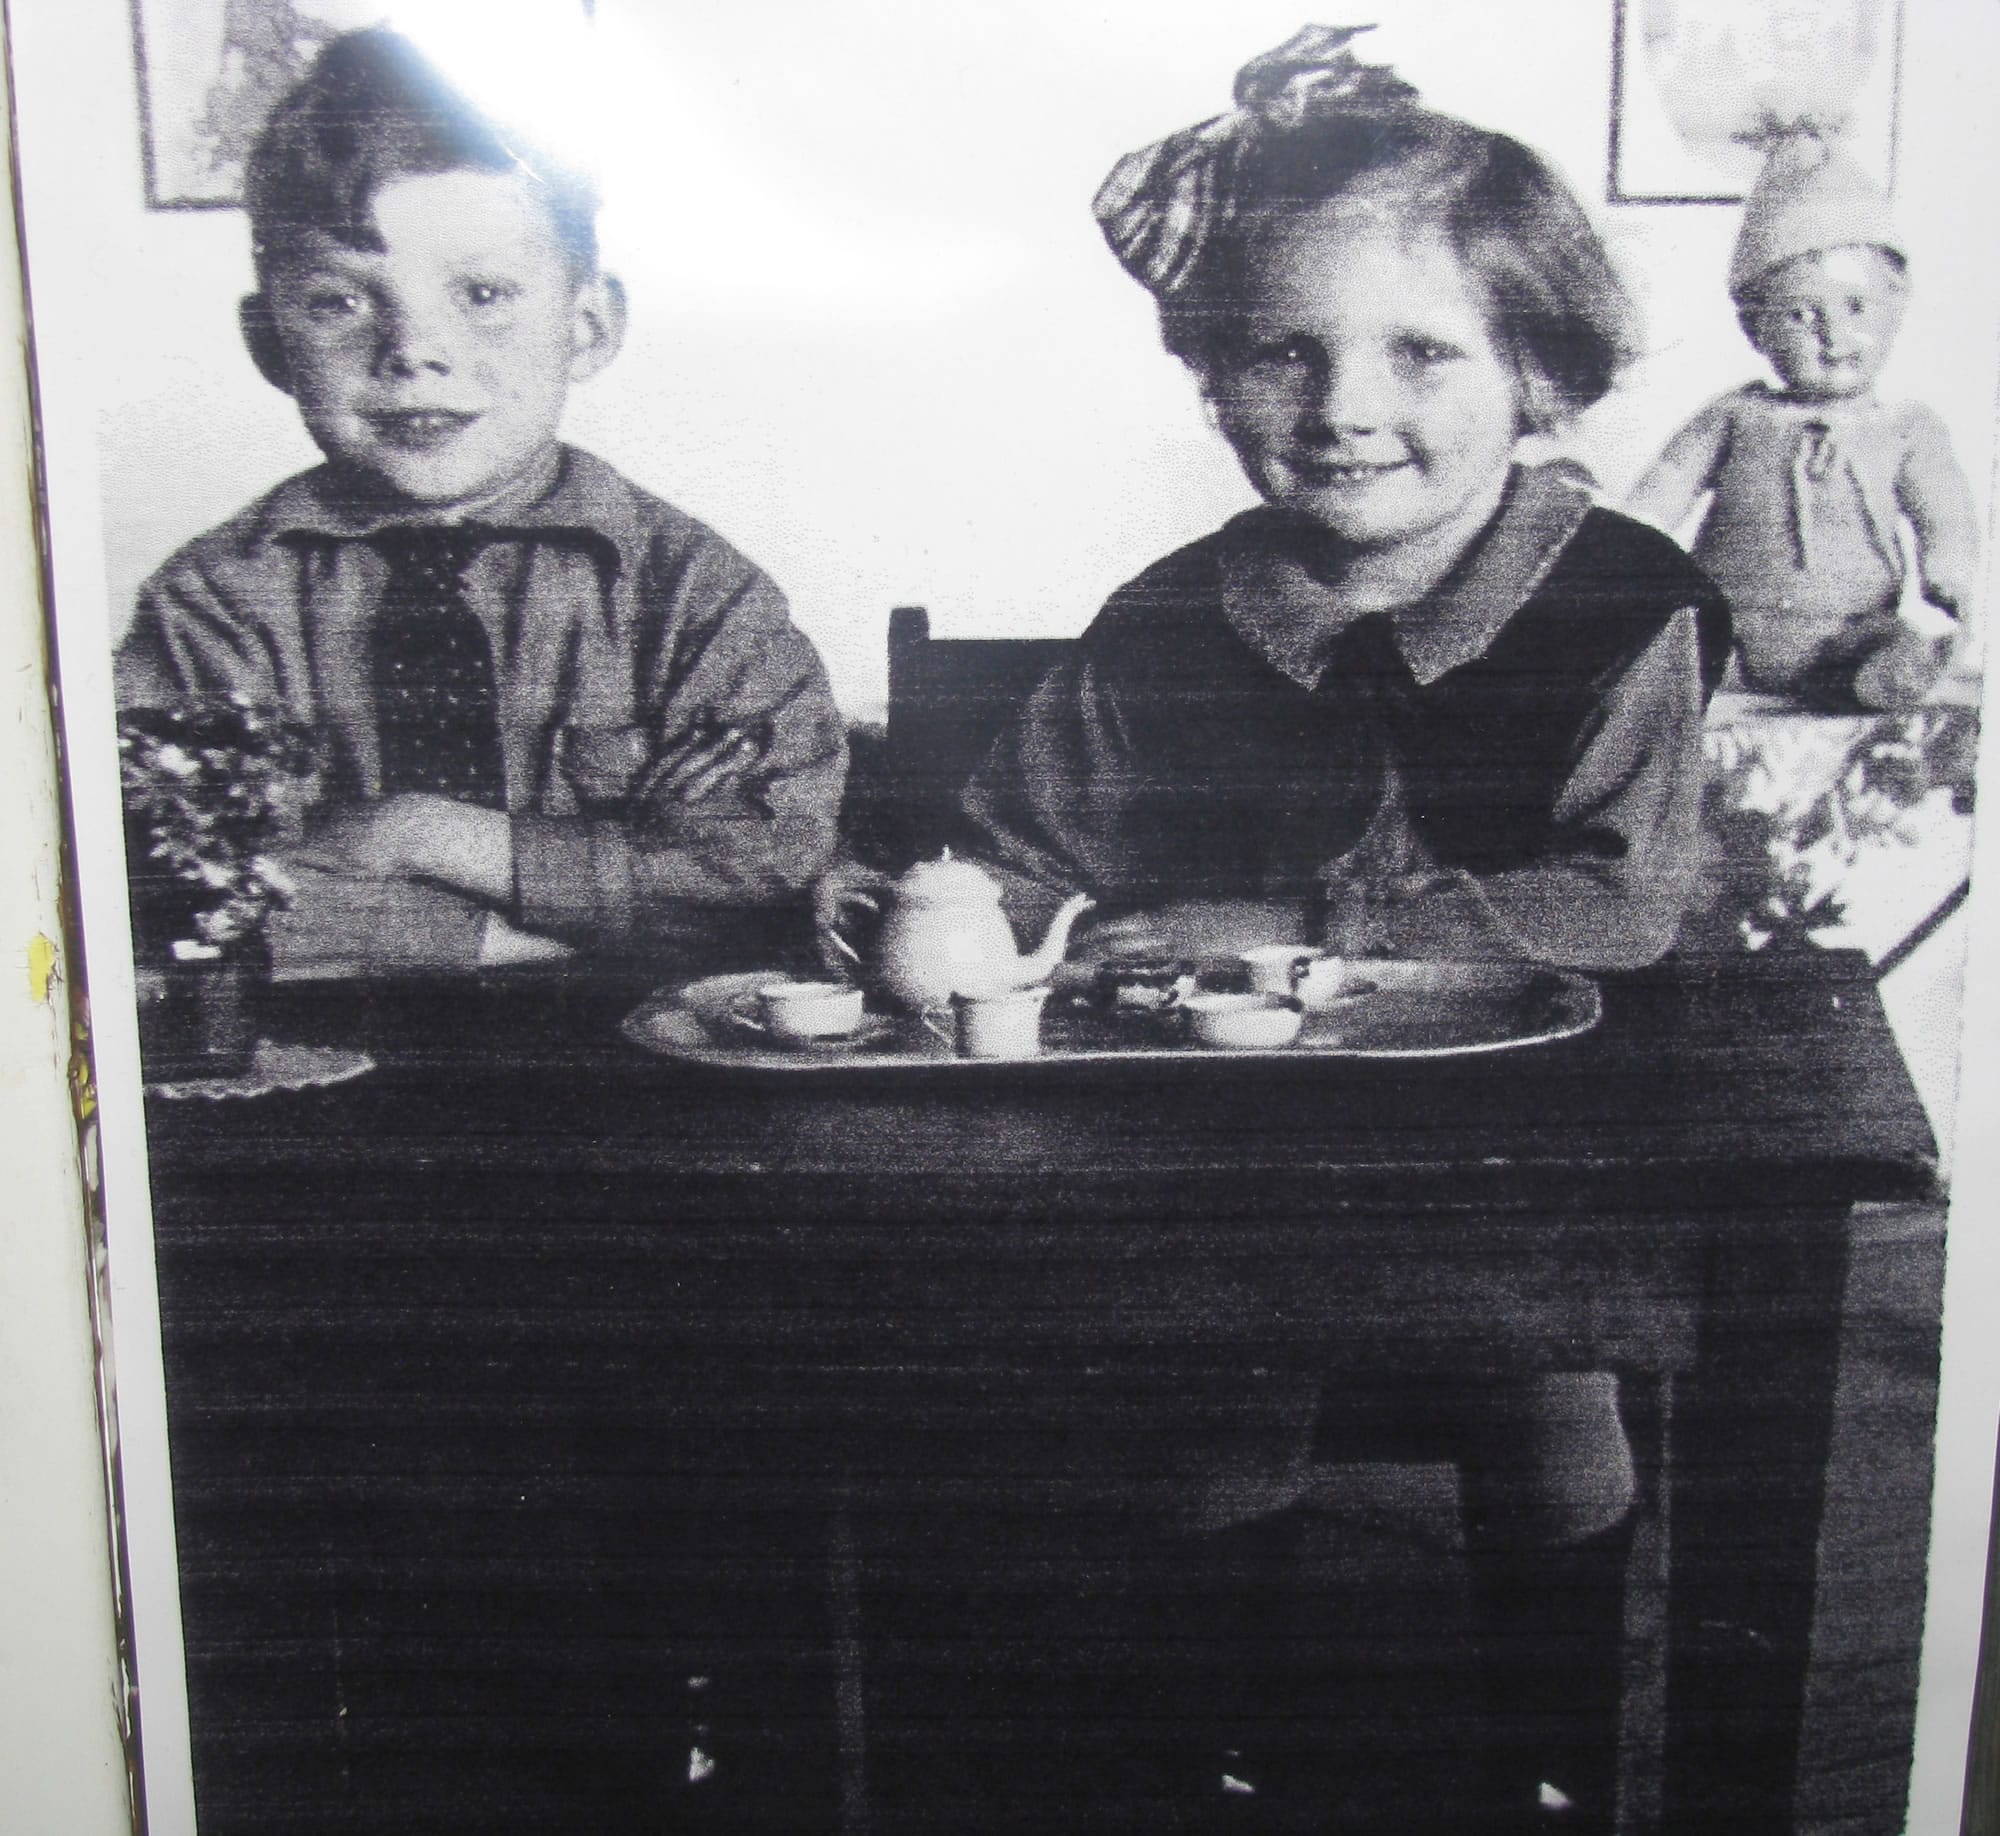 As a little Jewish girl in the Netherlands during World War II, Anneke Bloomfield hid from the Nazis. Here is Anneke just before the war at age 4, with her brother, Klaasje, age 5. Bloomfield will tell her story at 3 p.m.